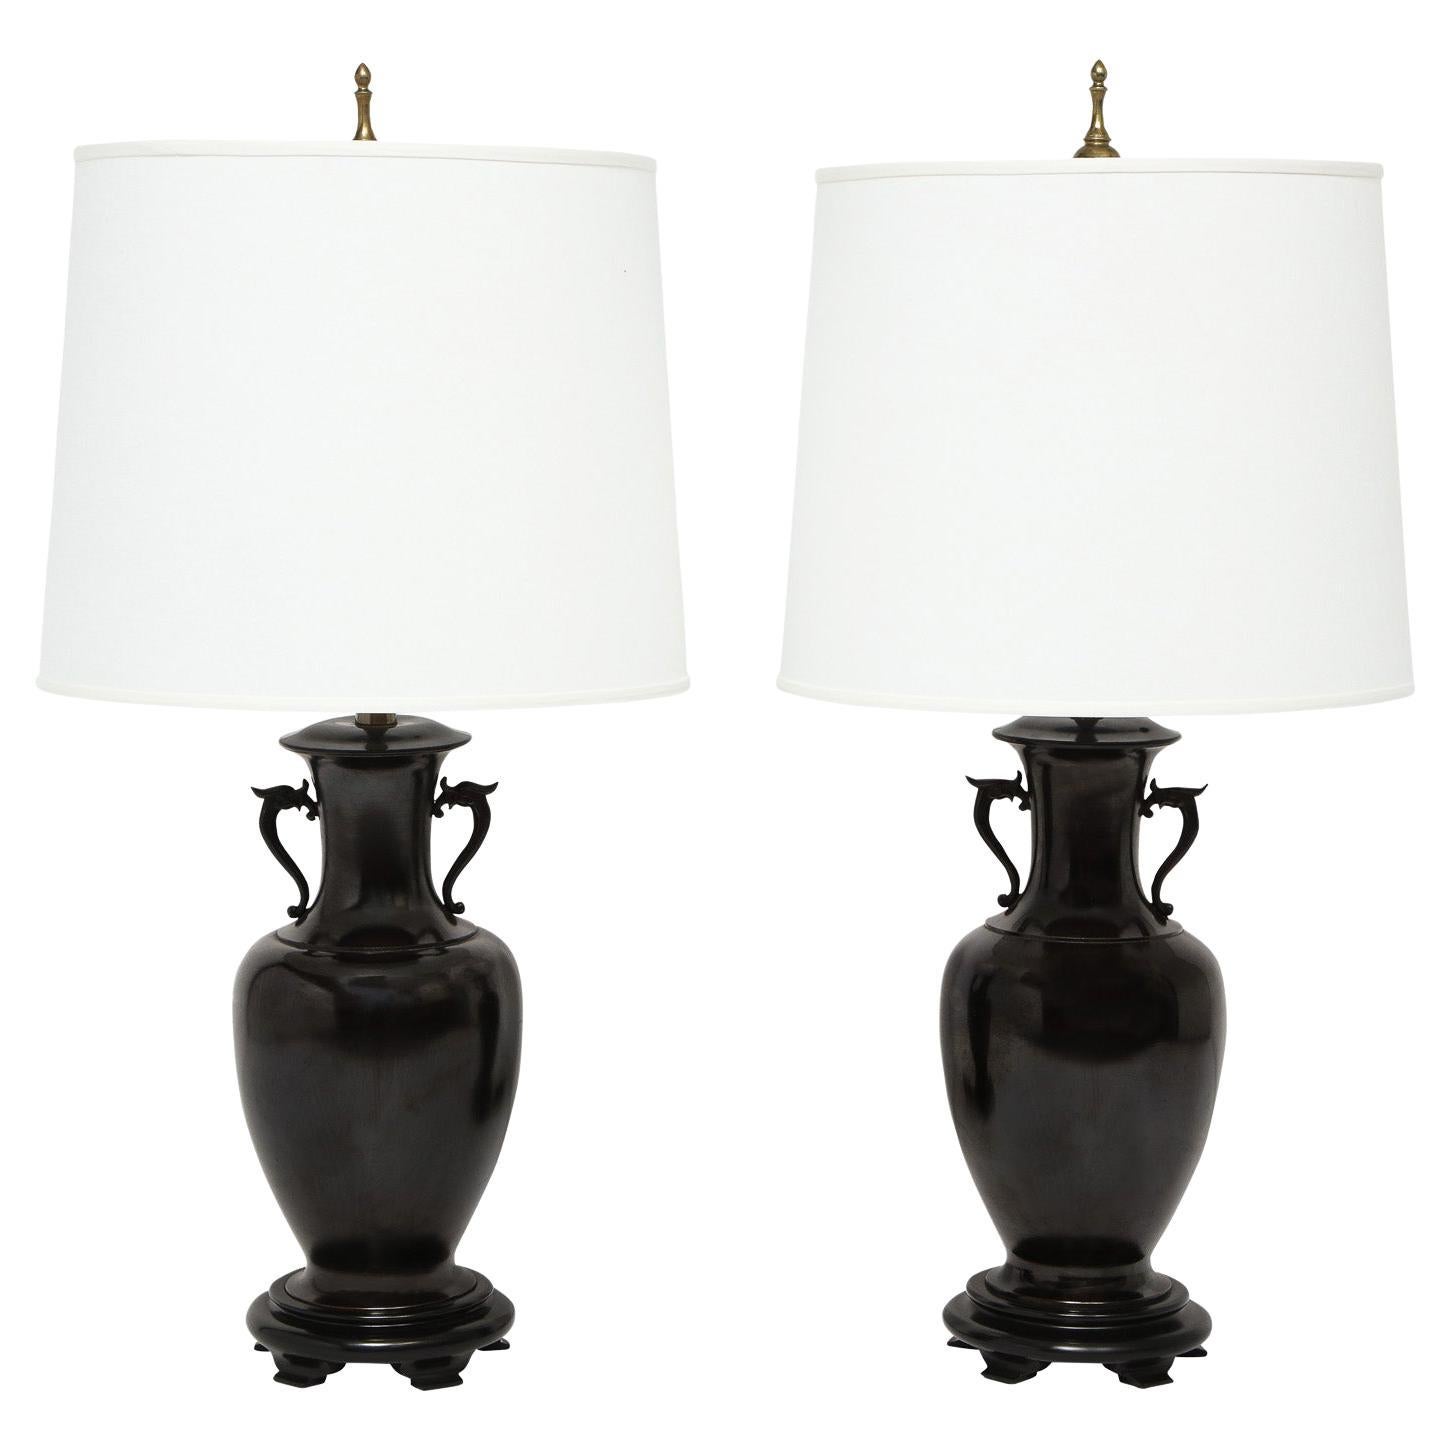 Pair of Artisan Asian-Style Table Lamps in Gunmetal Bronze 1960s For Sale